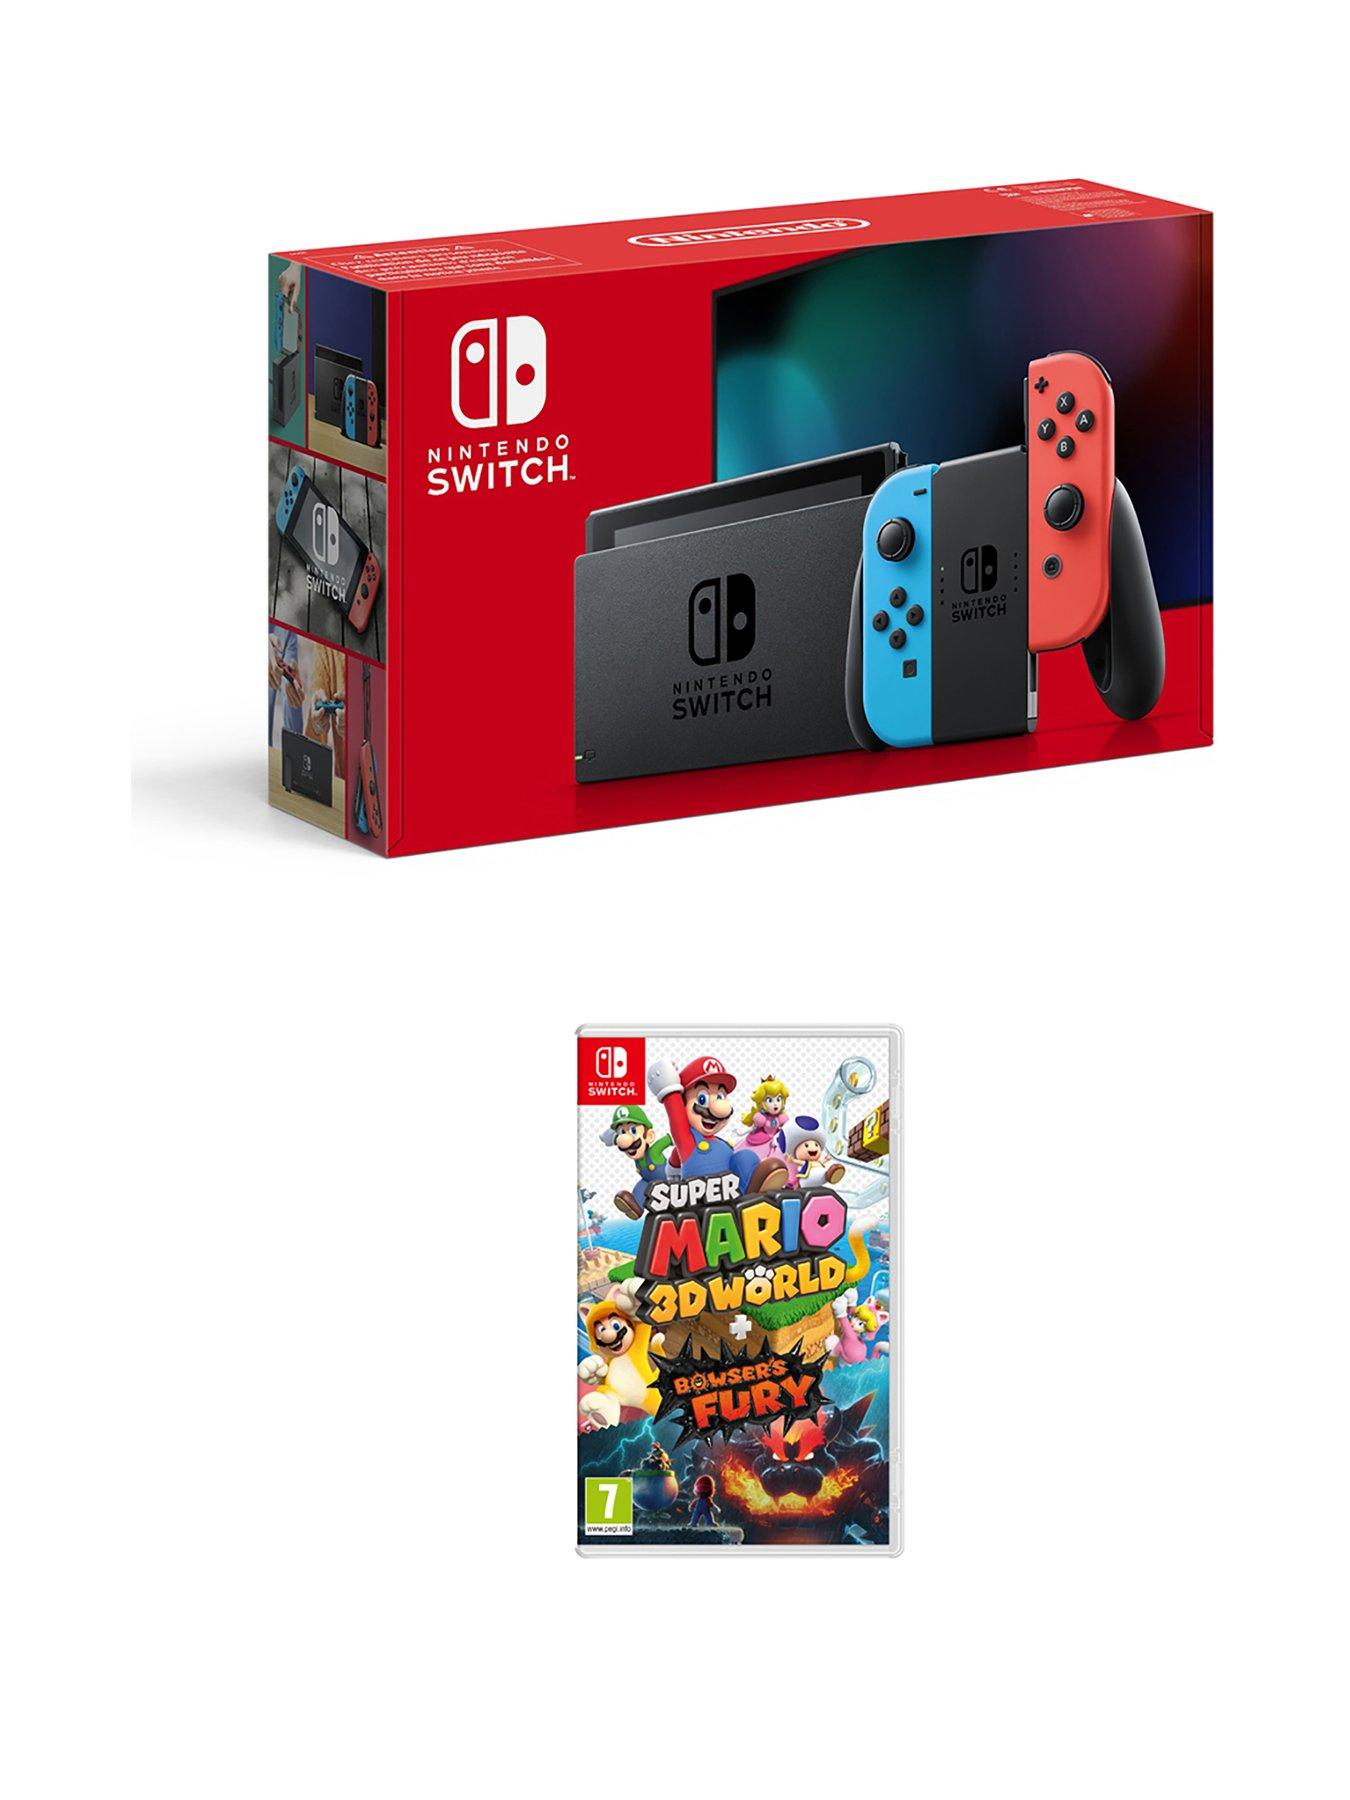 Nintendo Switch Super Mario 3D World Bowsers Fury Game Deals US Version for  Nintendo Switch OLED Switch Lite Switch Game Card